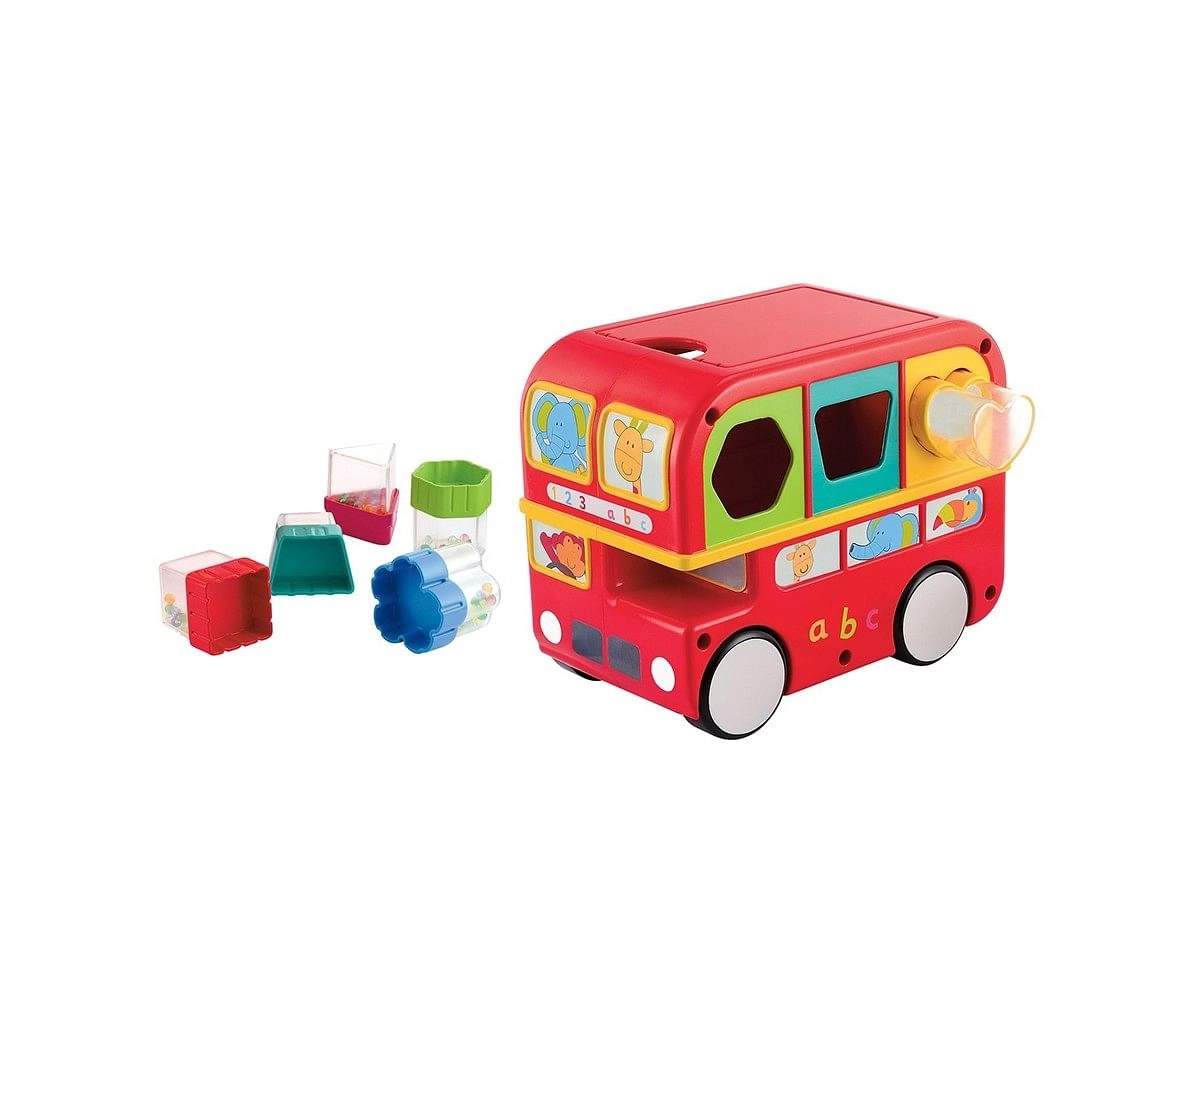 Giggles Shape Sorting Bus Activity Toys for Kids age 6M+ 